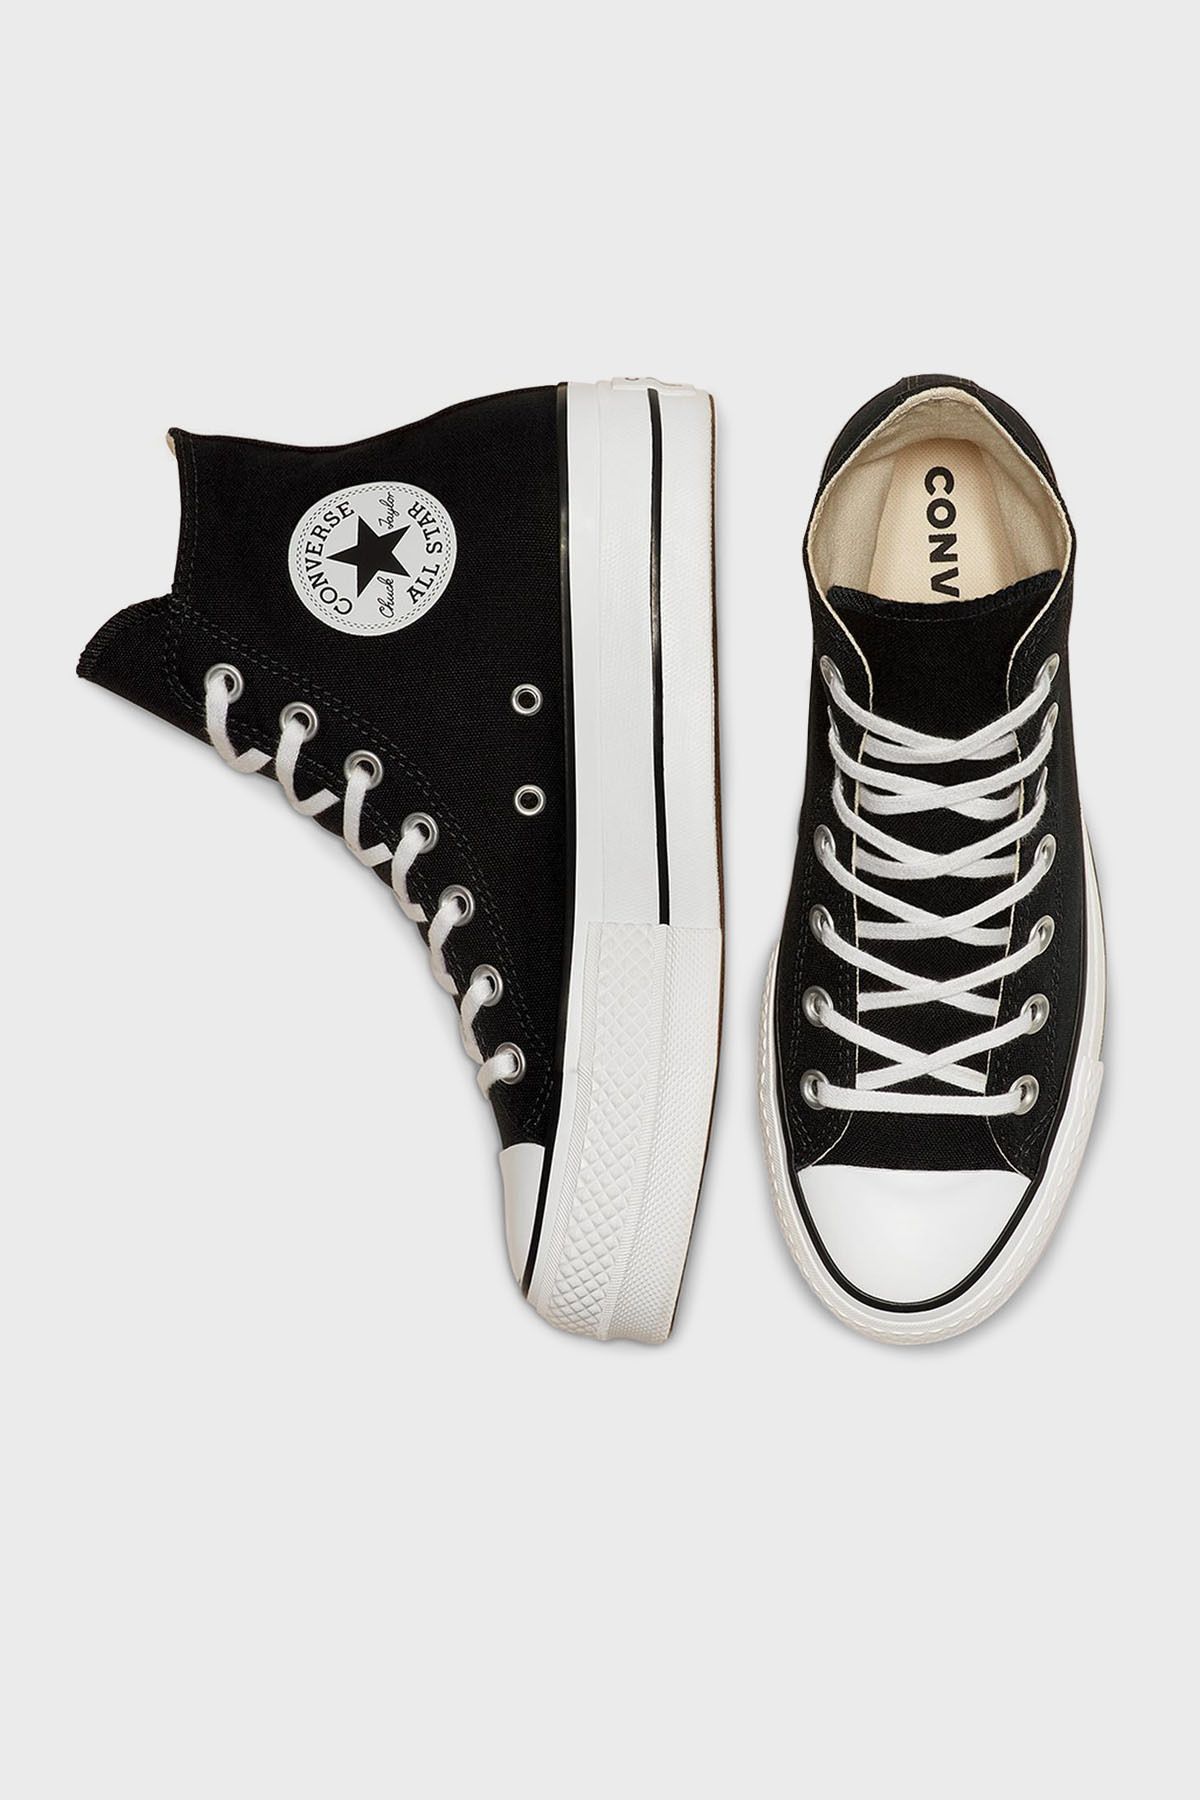 Converse All Star Black Wedge Sneakers US6, Women's Fashion, Footwear,  Wedges on Carousell